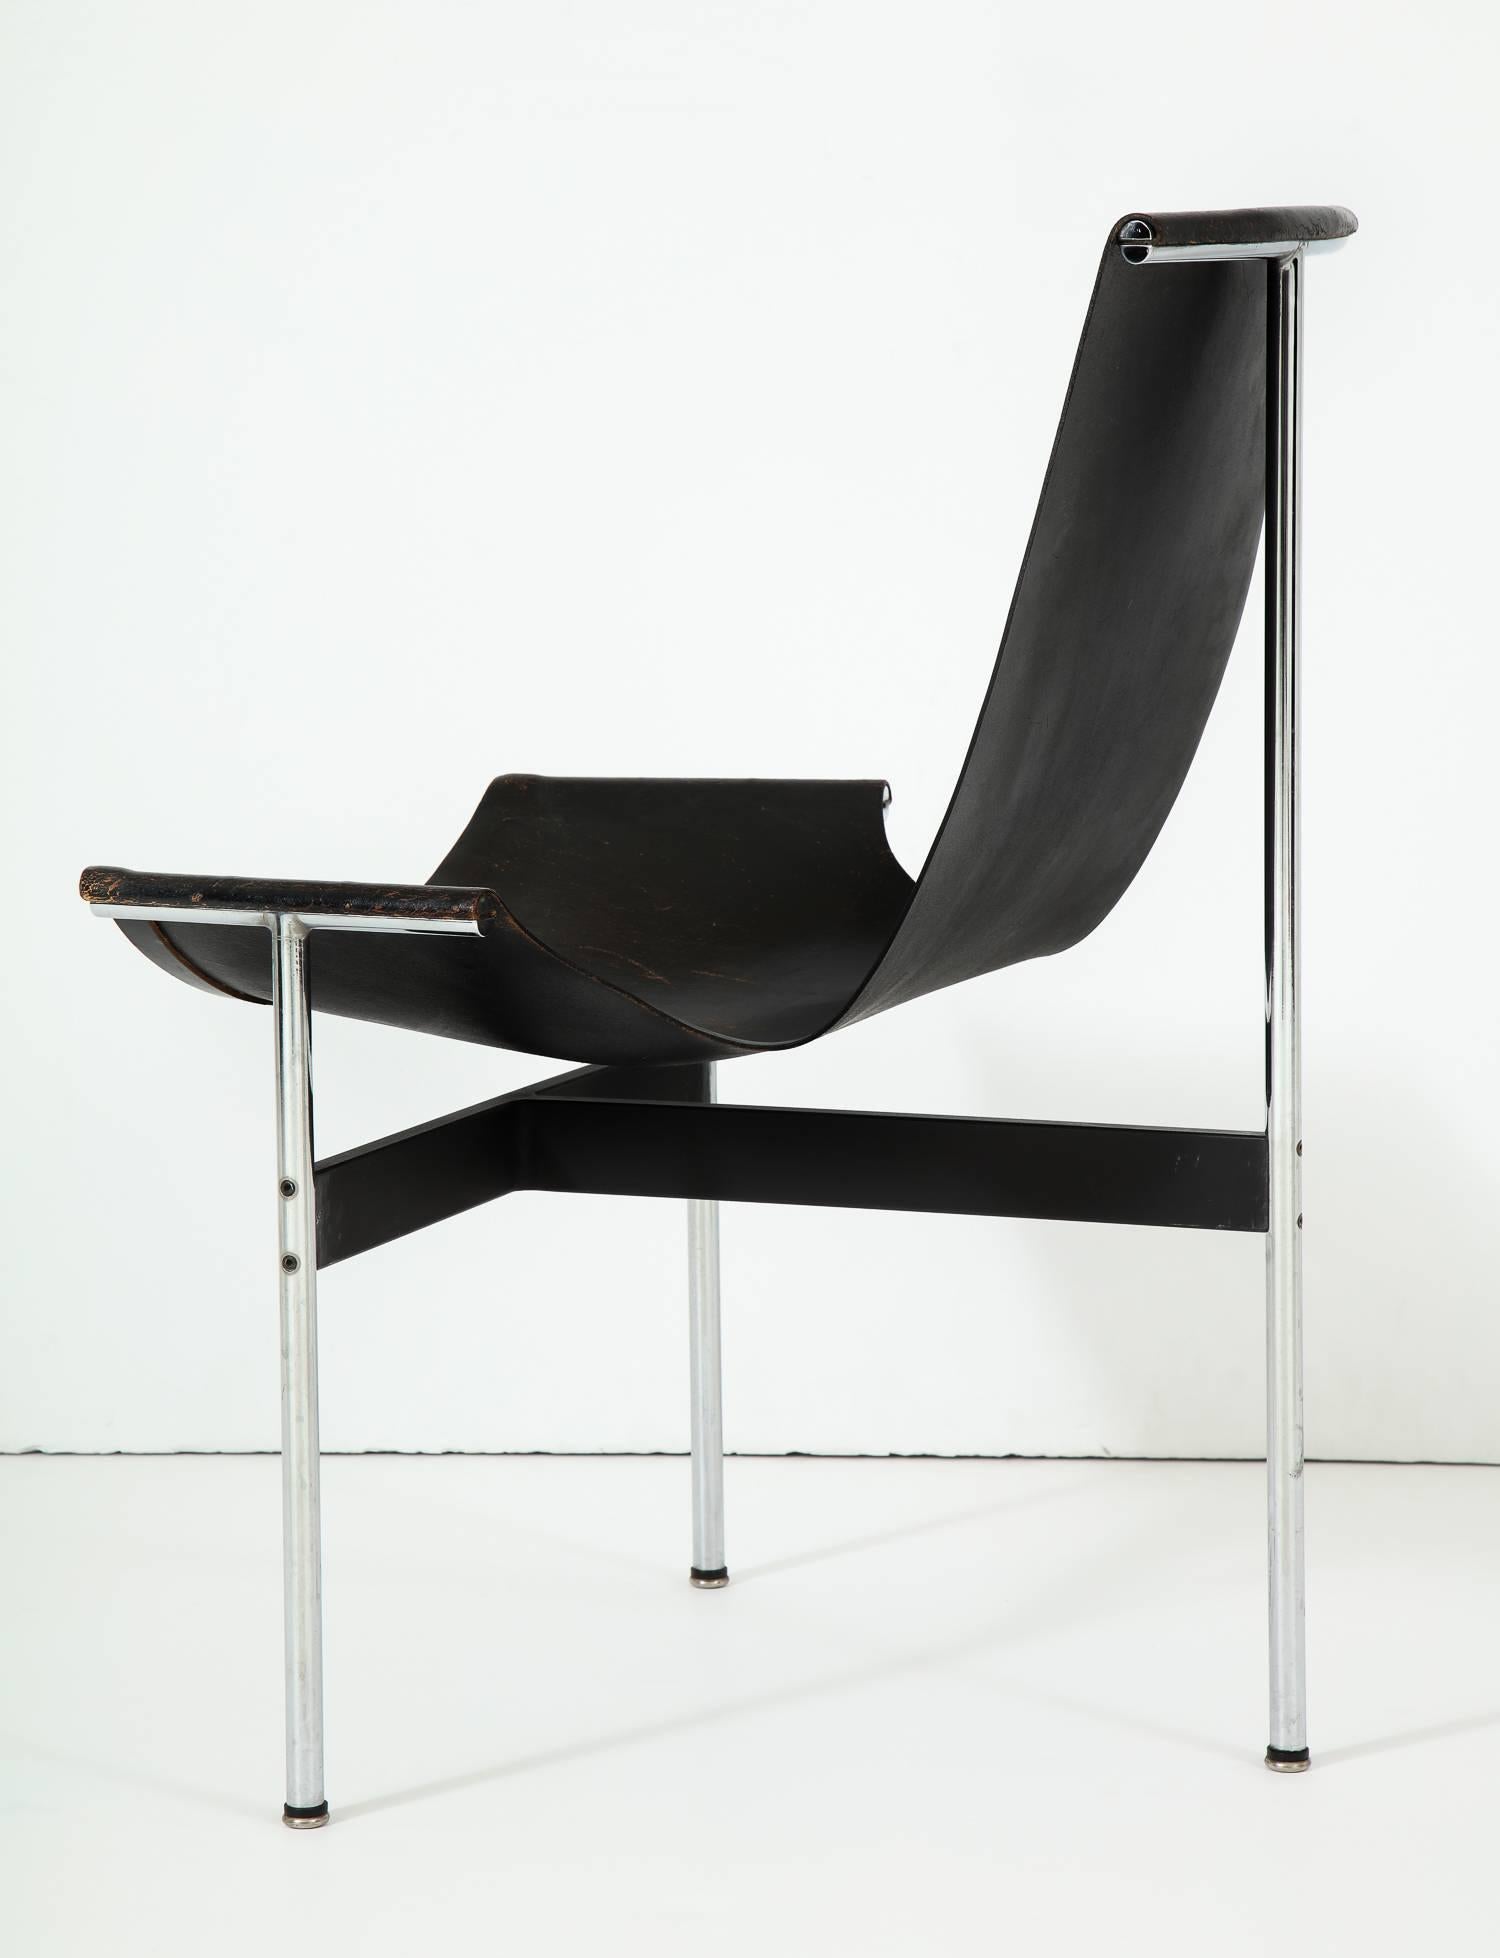 American Laverne T-Chair by Katavolos, Littell and Kelley